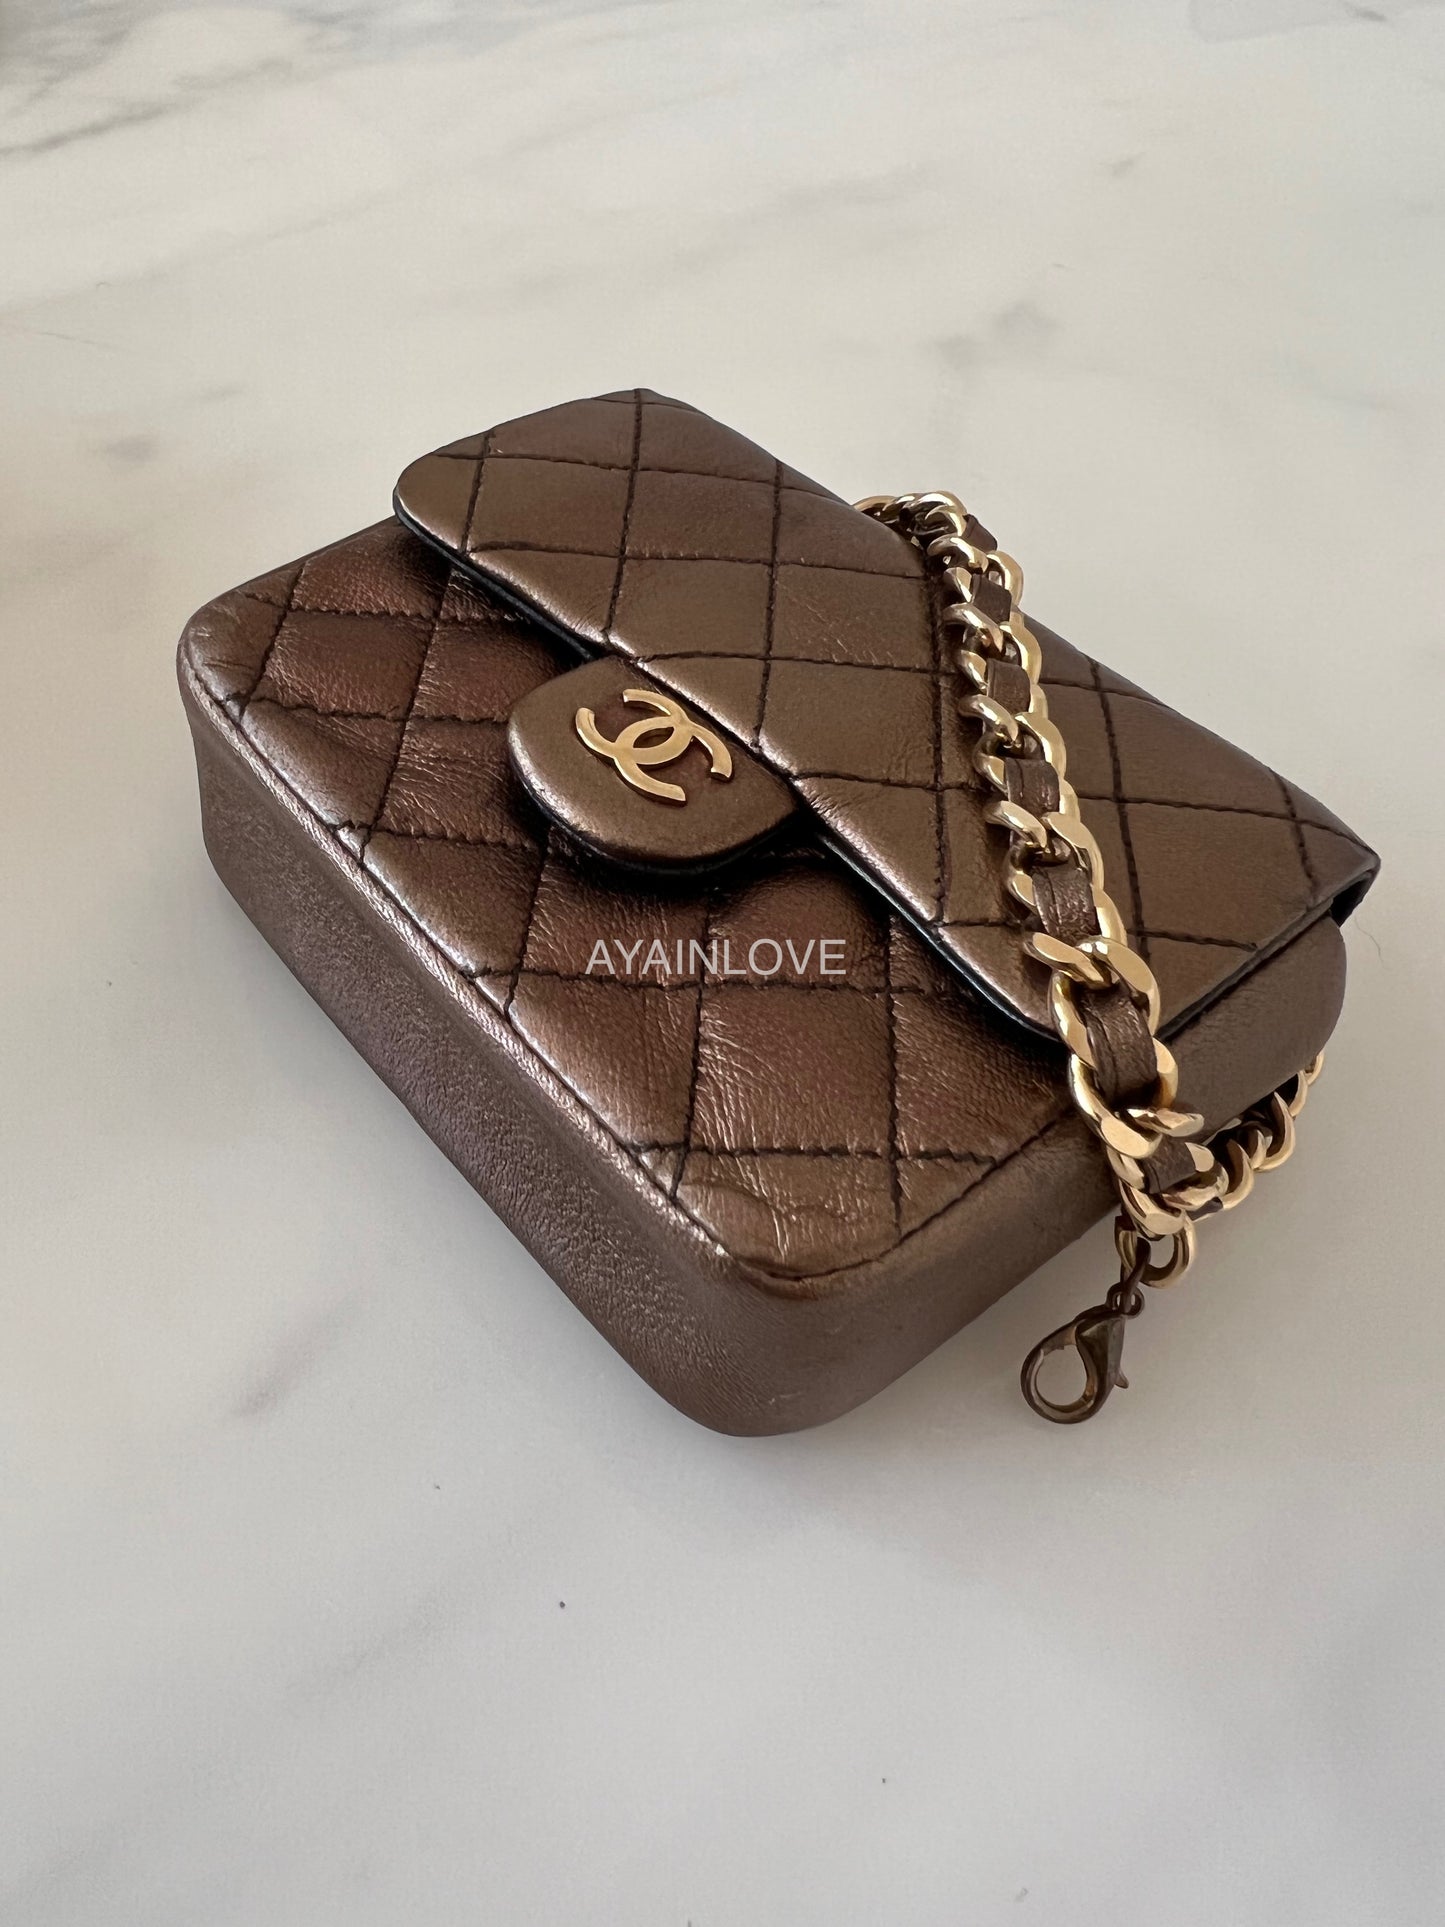 CHANEL Vintage 1997-1999 Mini Bronze Flap Pouch Bag Charm 24K Gold Plated Hardware